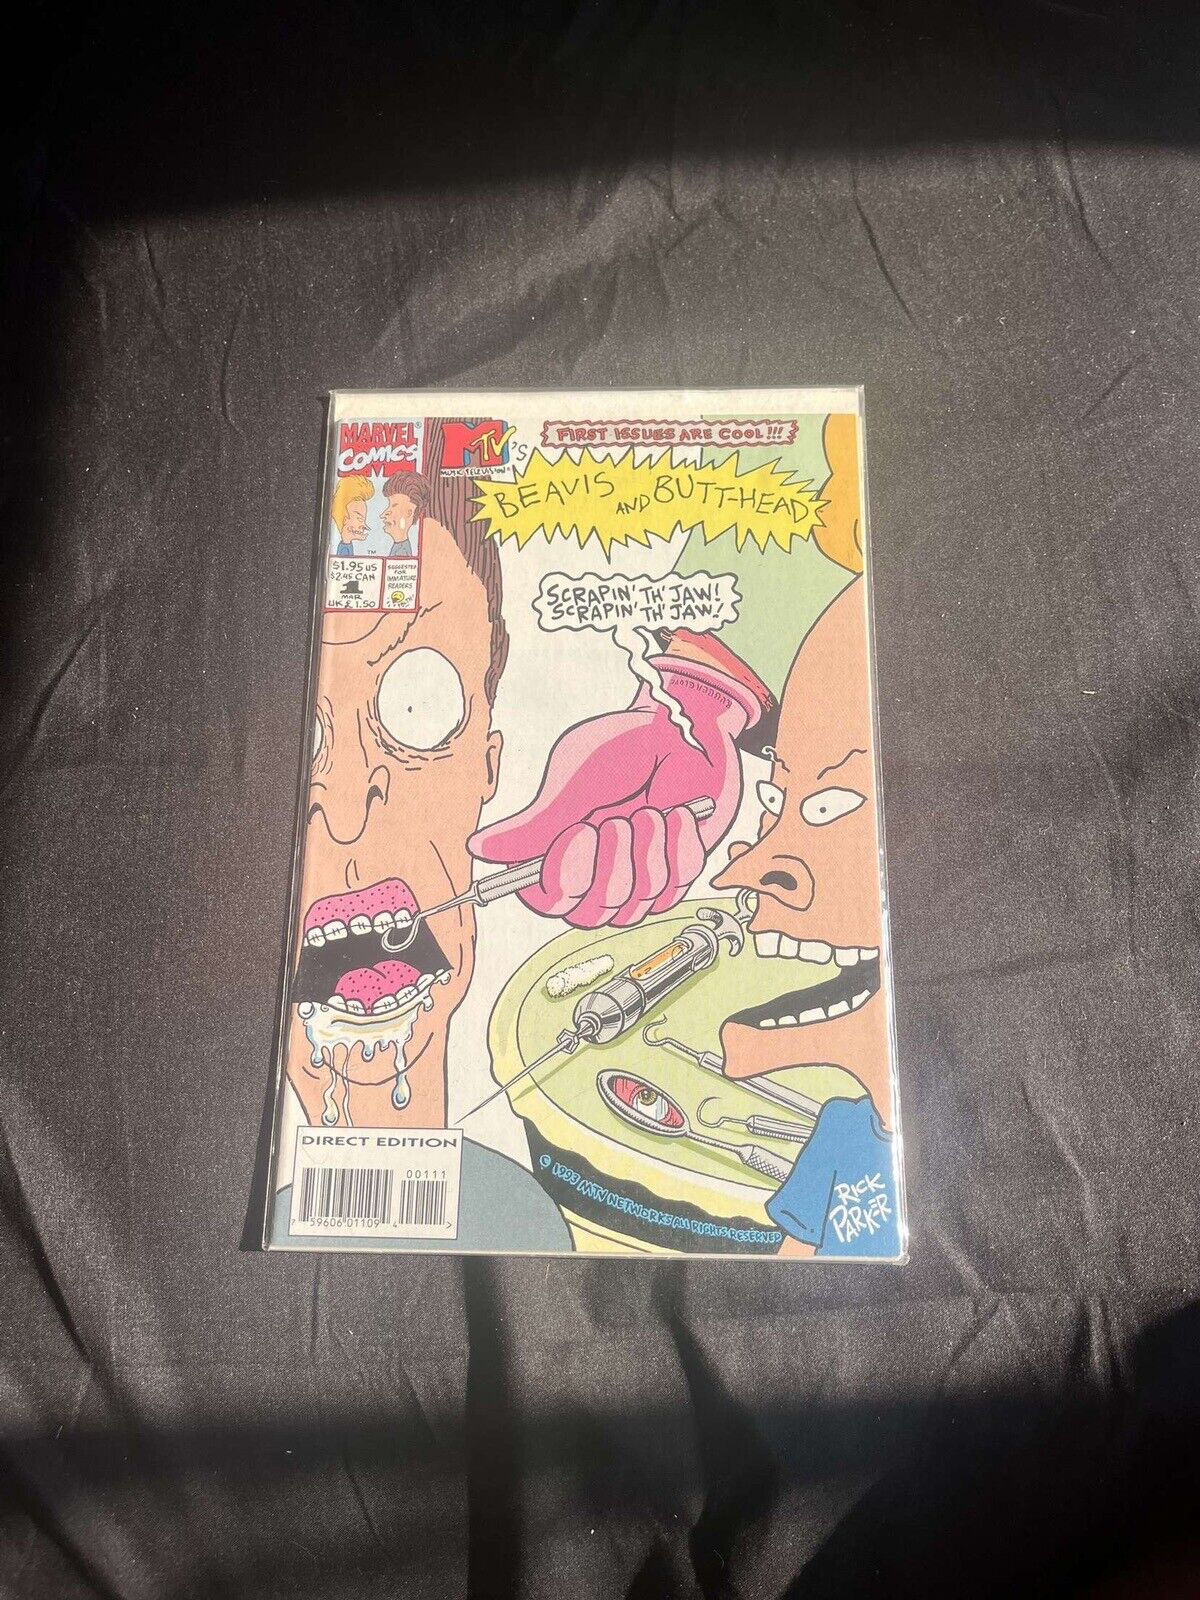 Beavis And Butt-head Mtv Marvel Comics 1993 First Issues Are Cool